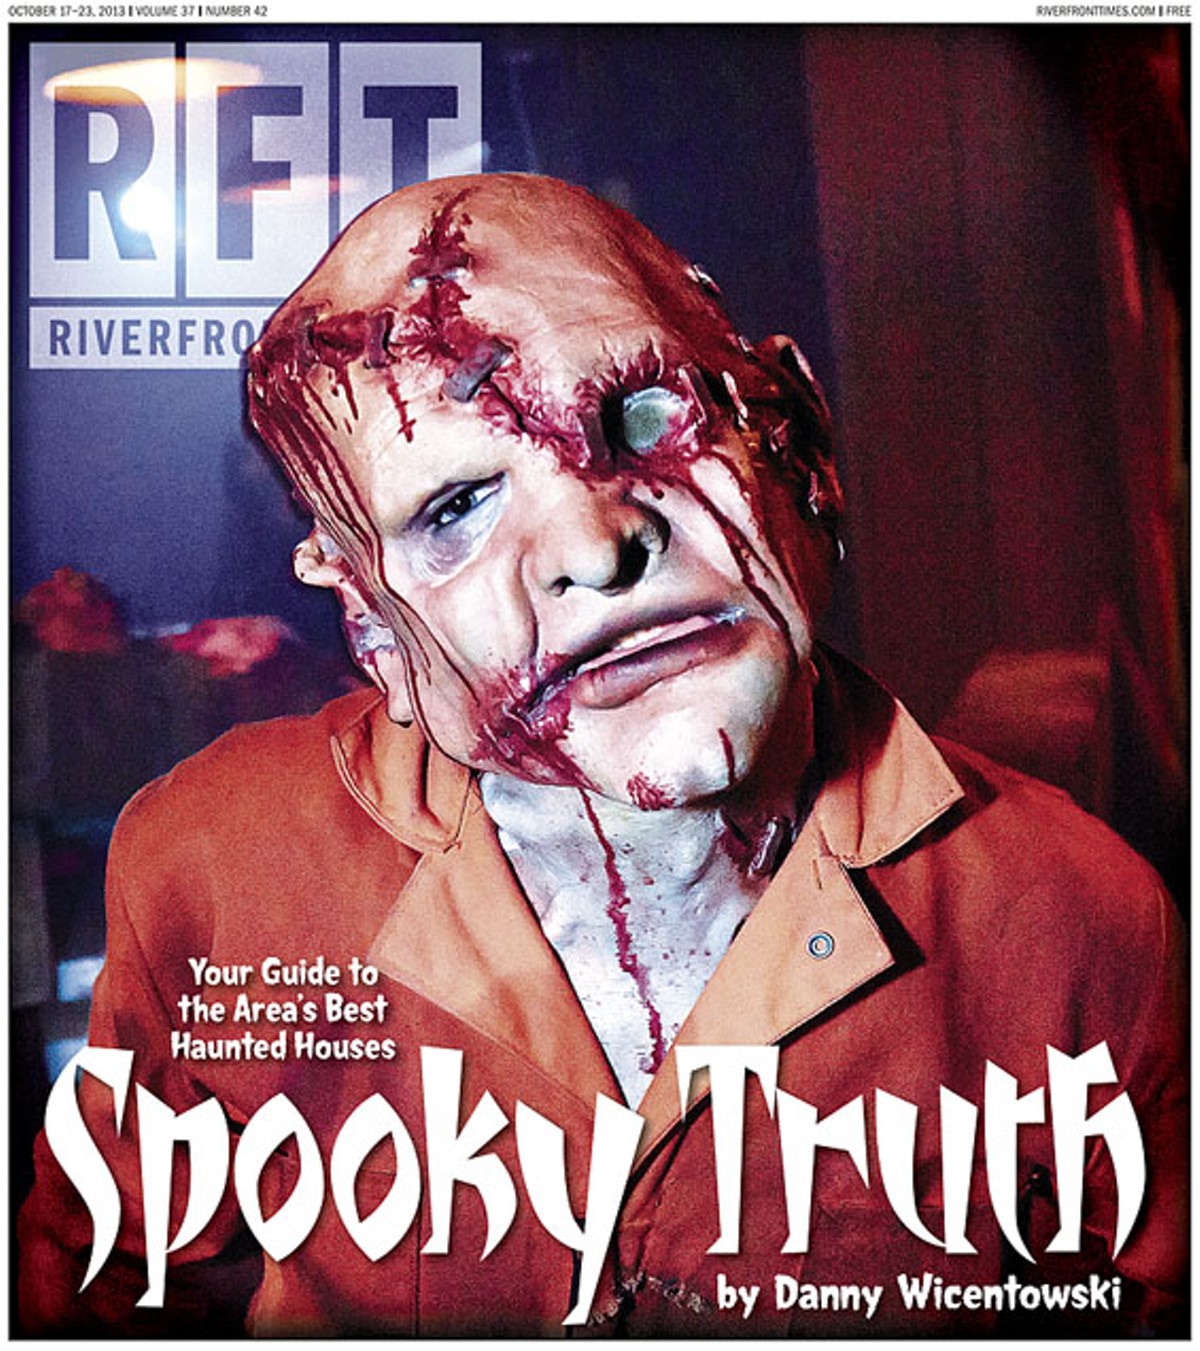 The Cover of the October 17 Print Edition